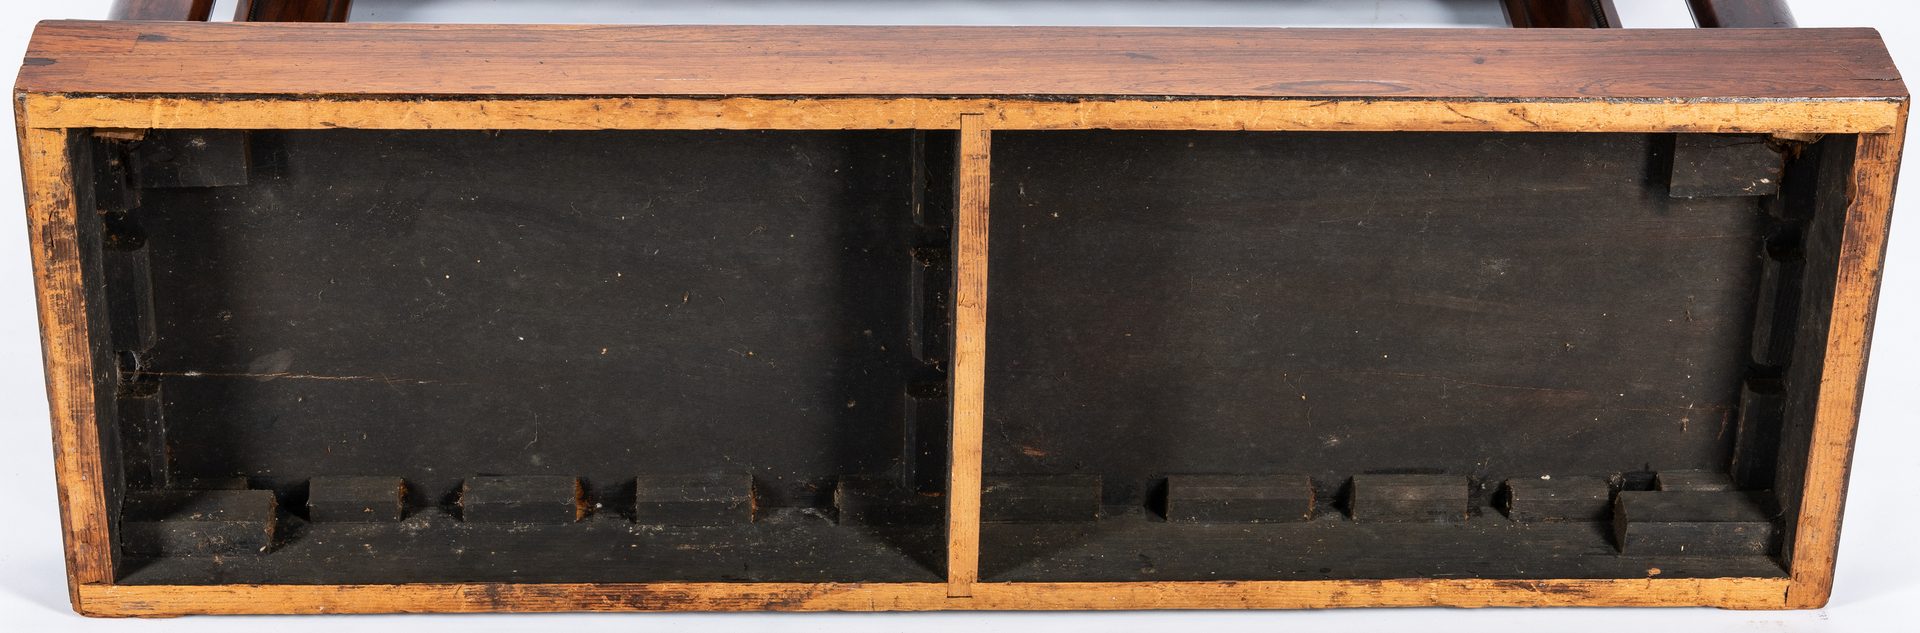 Lot 132: Regency Rosewood Console Table